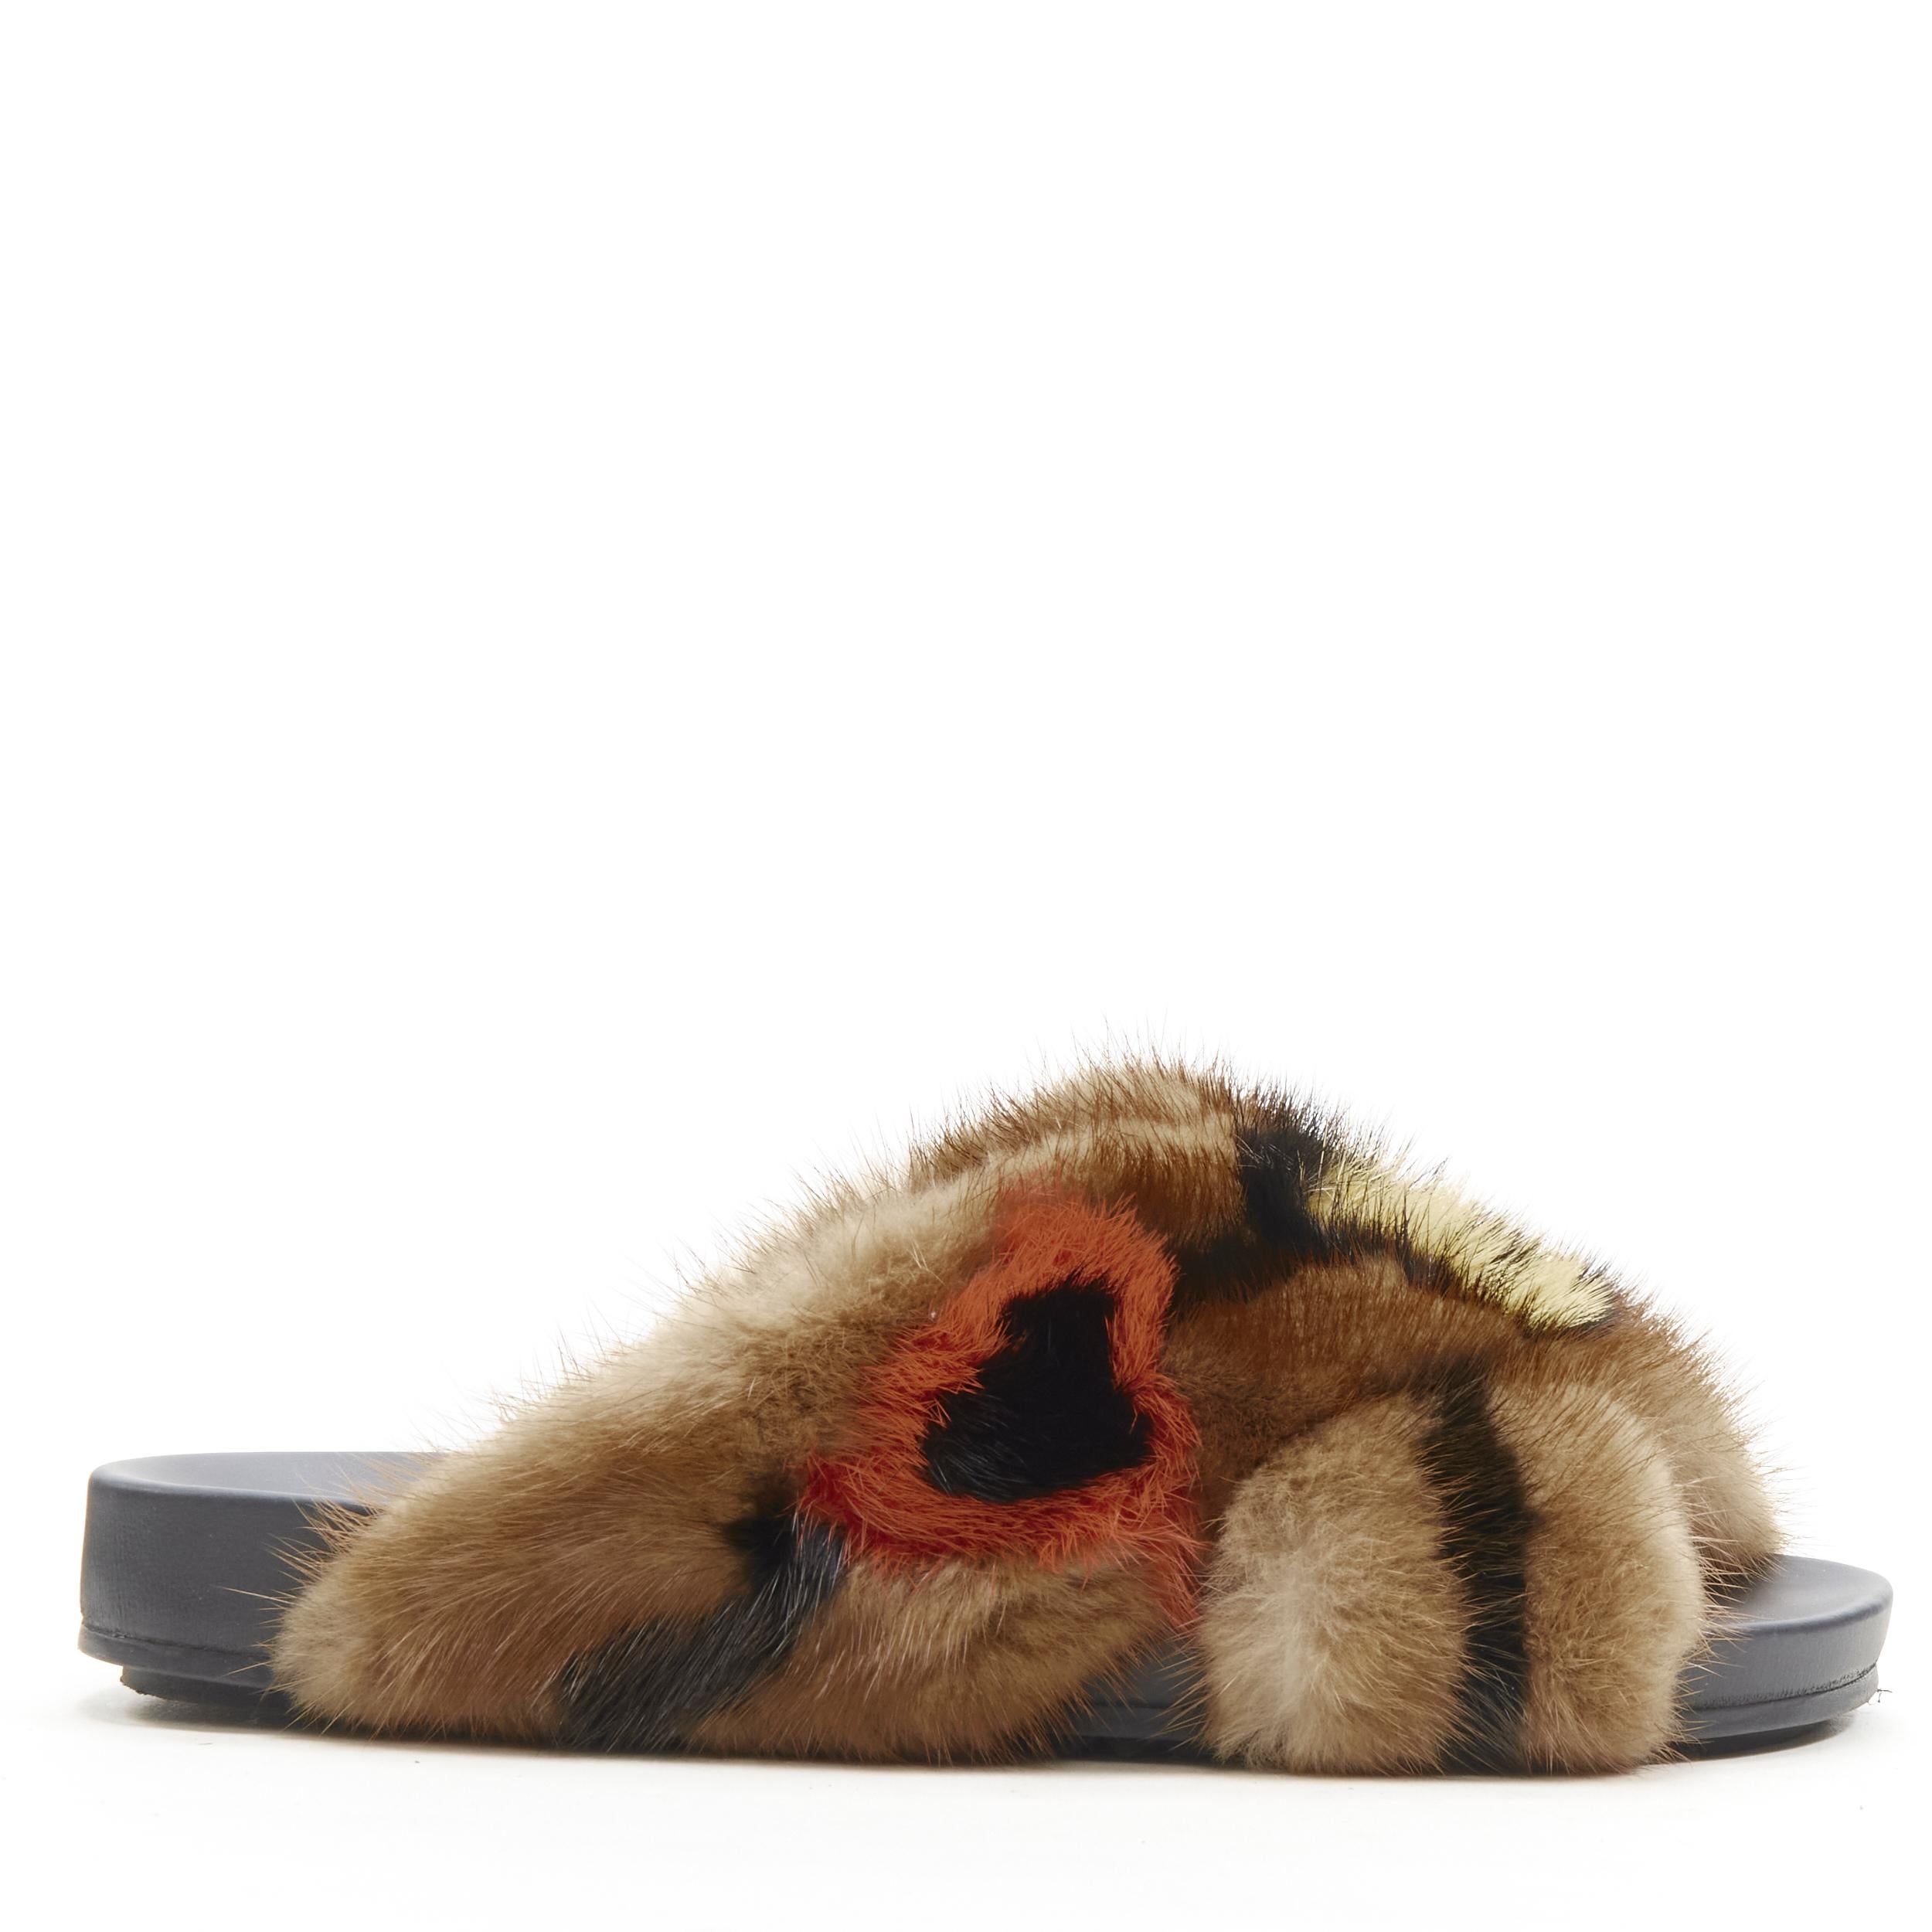 FENDI Open Your Heart brown mink fur cross strap slides sandals EU36 
Reference: ANWU/A00330 
Brand: Fendi 
Model: Open Your Heart 
Material: Fur 
Color: Brown 
Pattern: Solid 
Extra Detail: Genuine mink fur. 
Made in: Italy 


CONDITION: